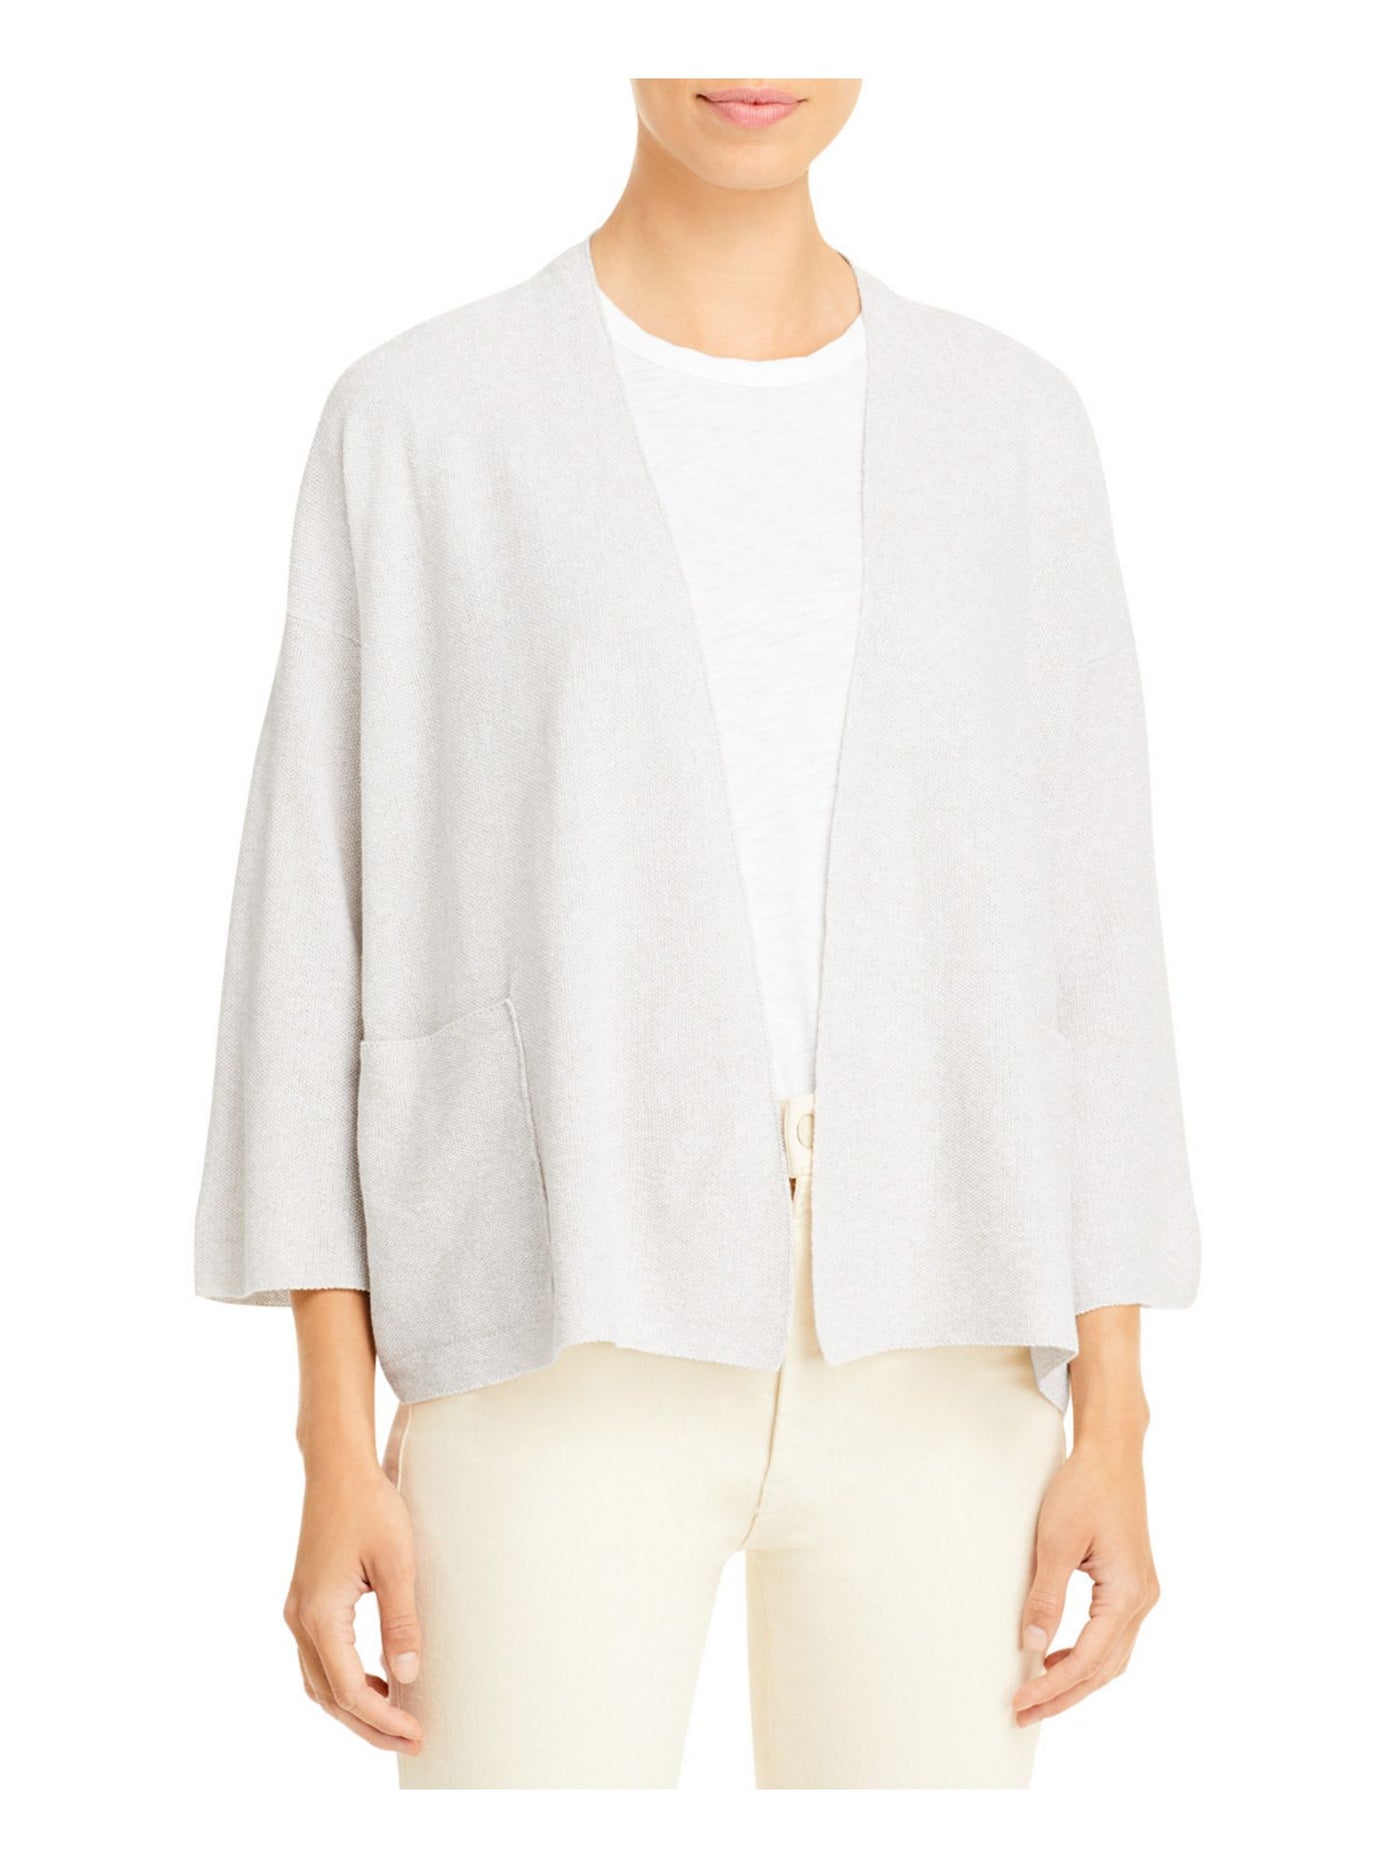 EILEEN FISHER Womens Beige Pocketed Textured Oversized Fit Cardigan 3/4 Sleeve Open Front Wear To Work Sweater M